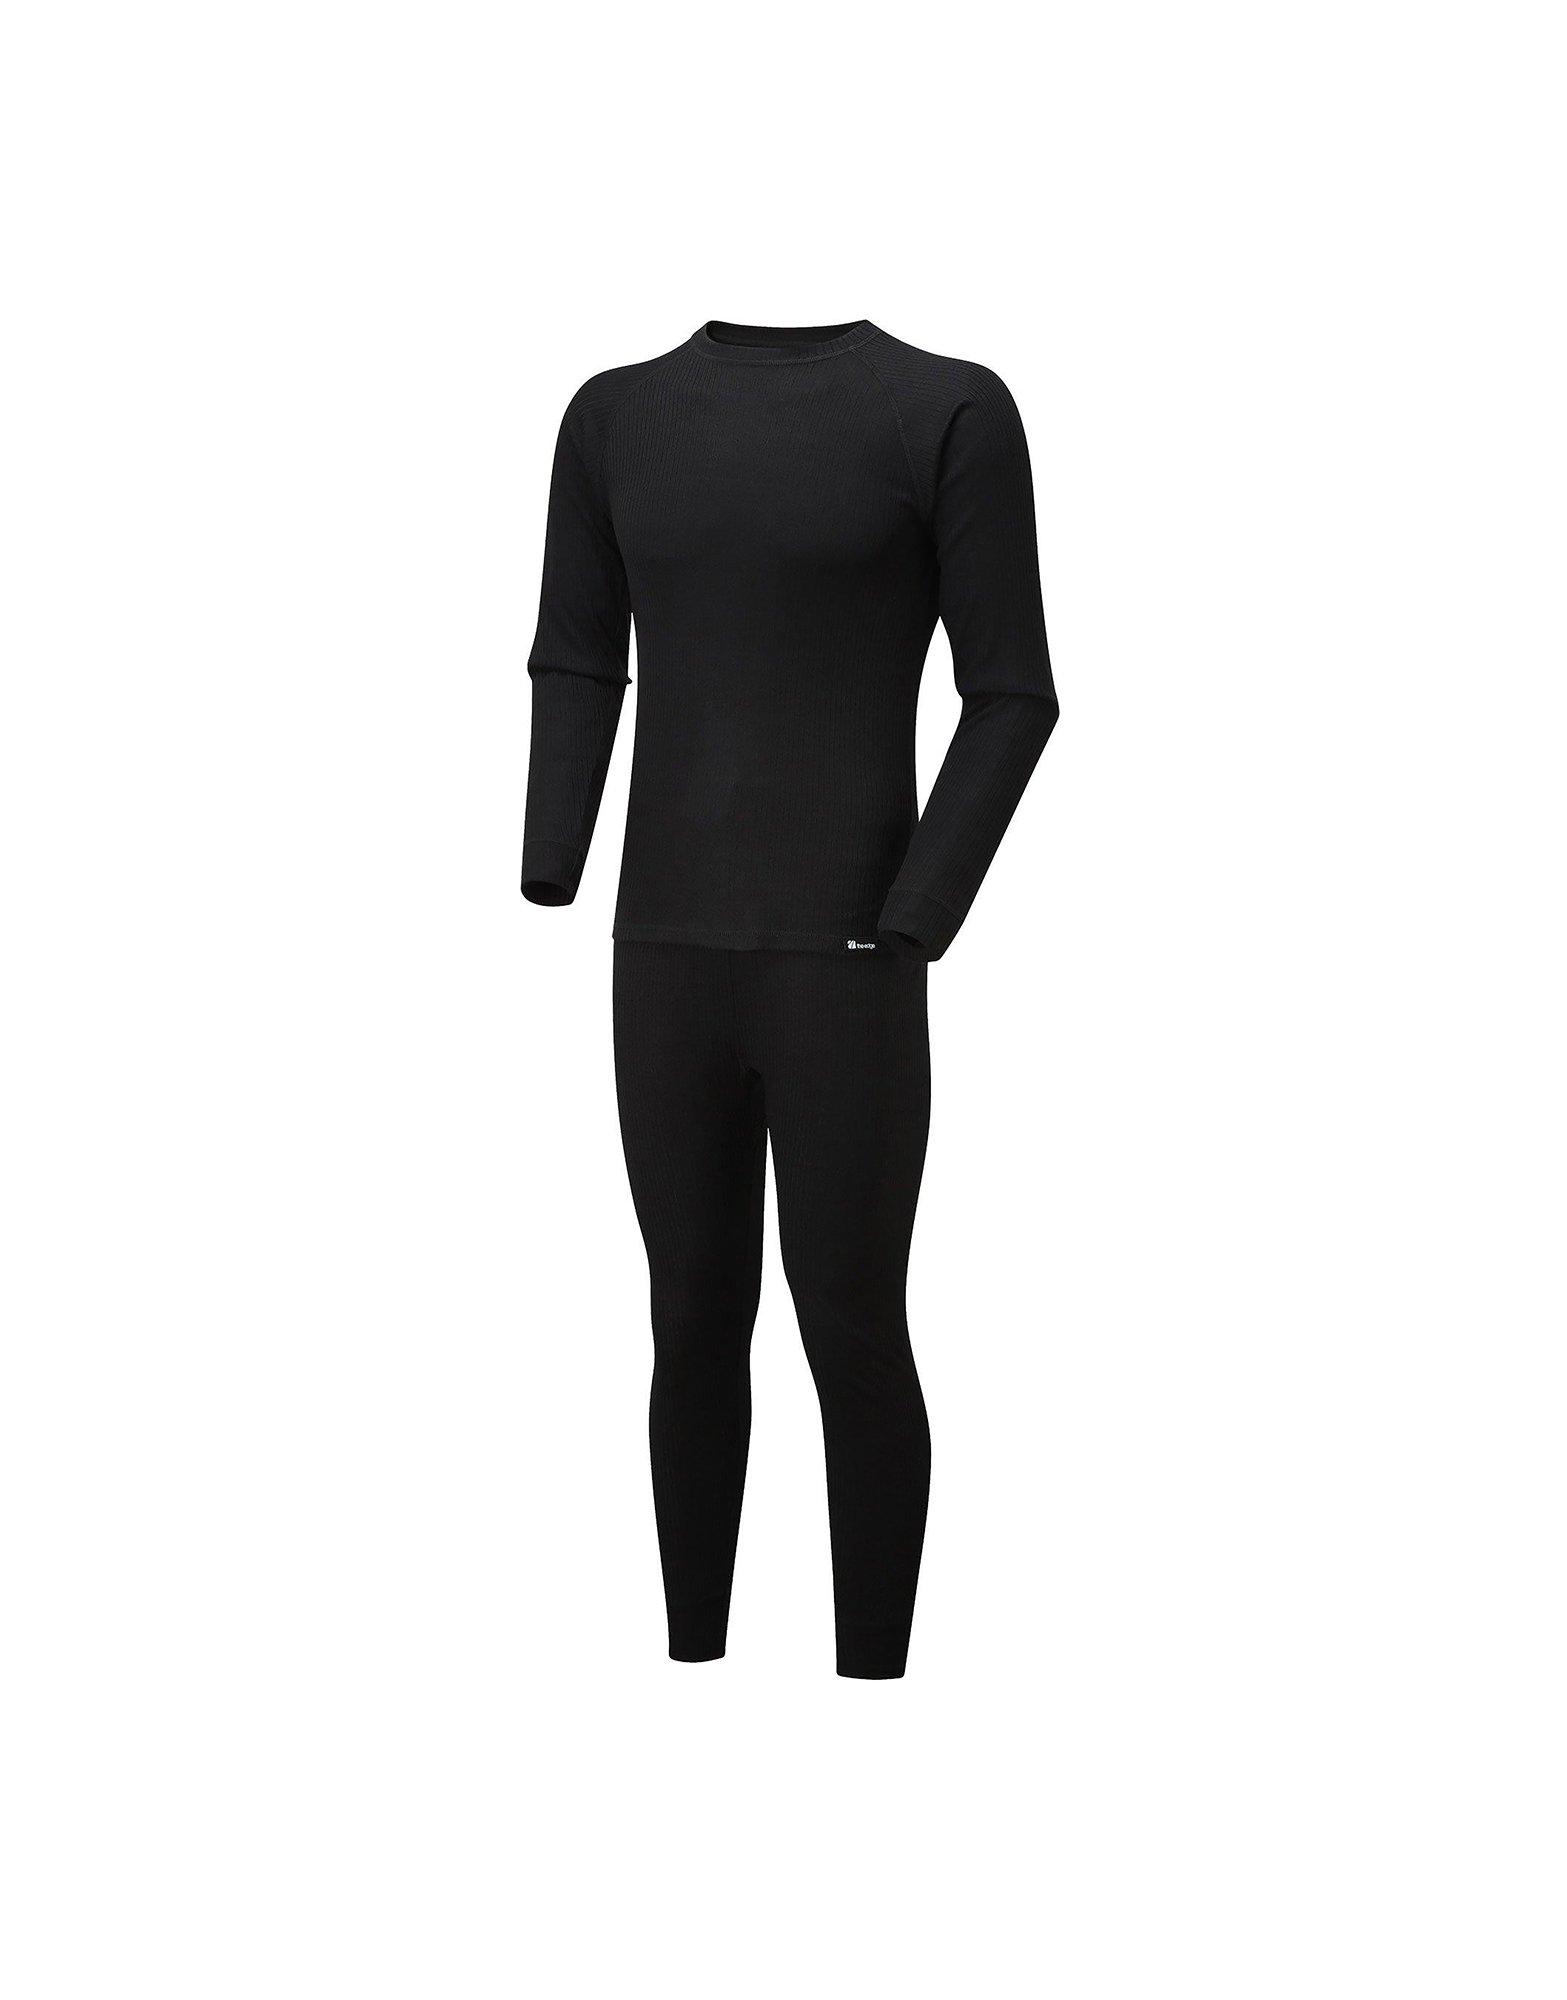 The Edge Drift Thermal Set (Unisex) Review